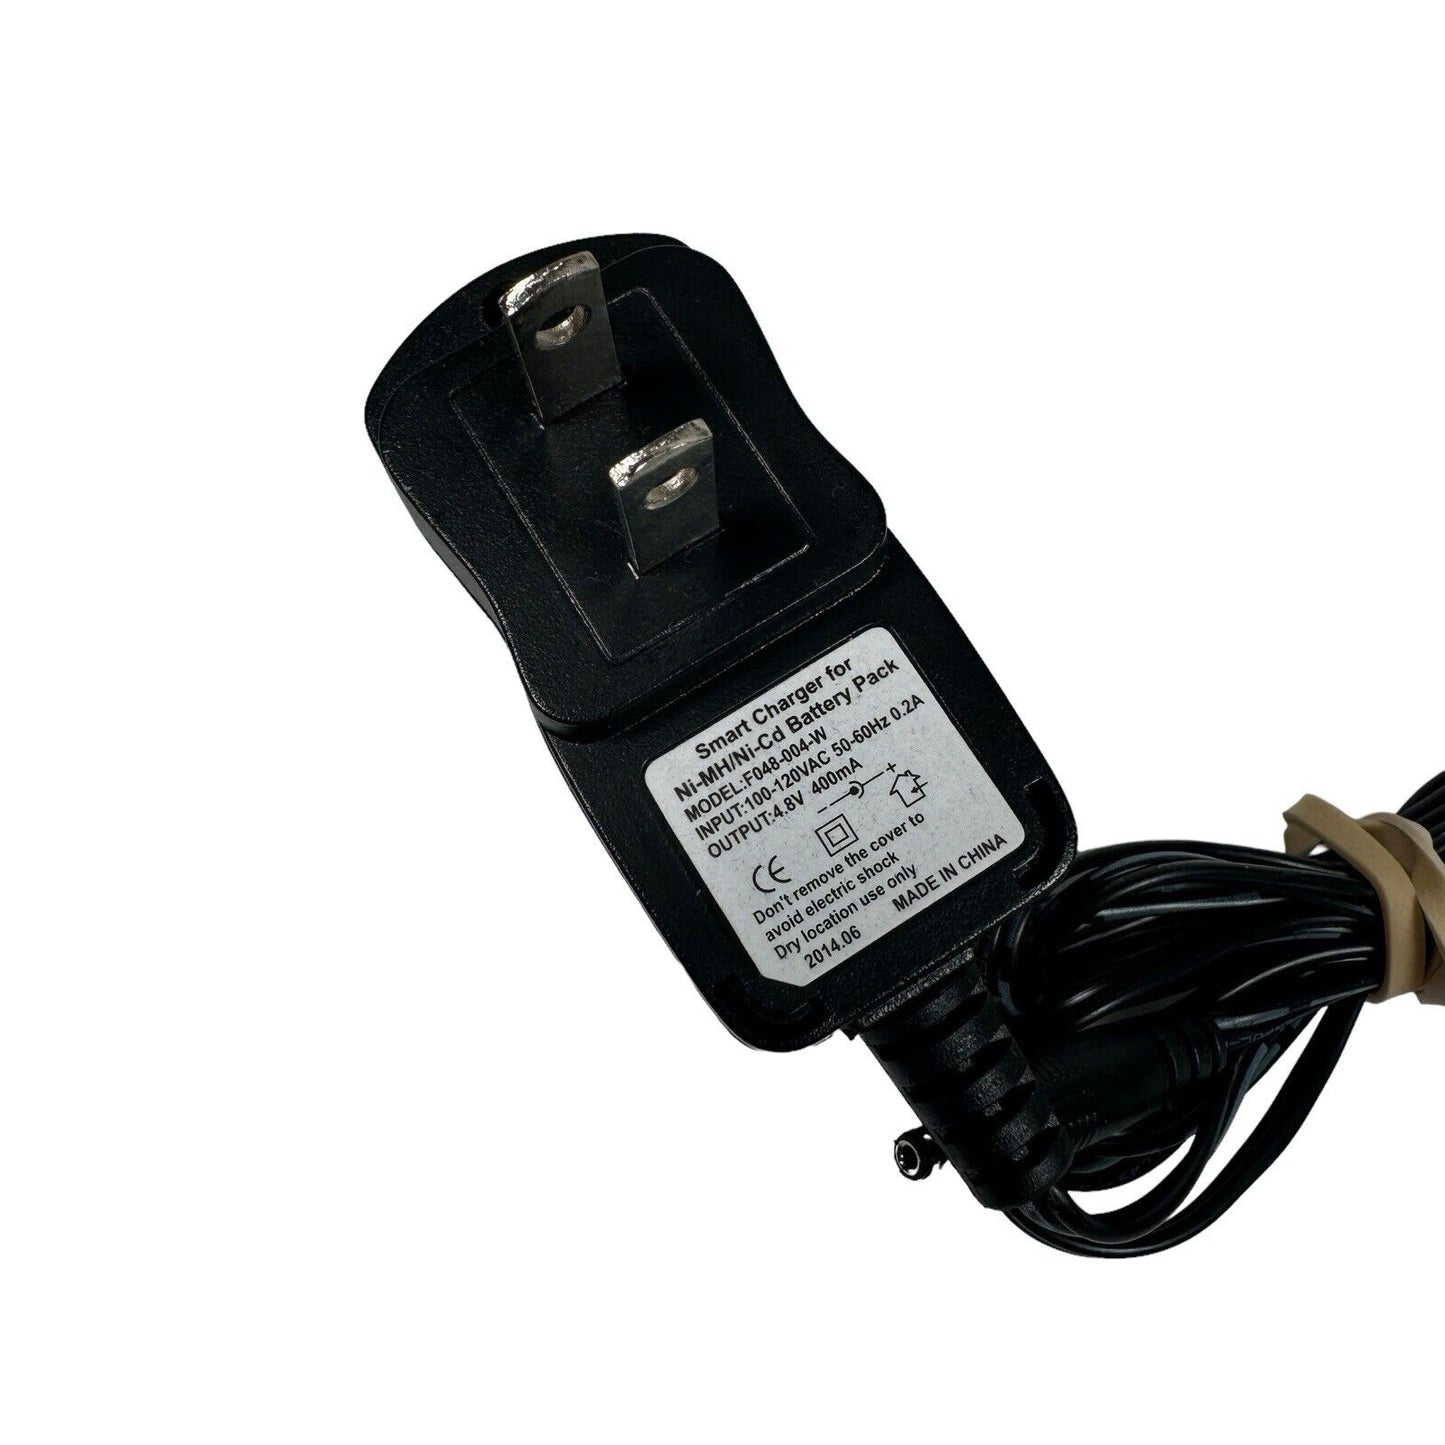 AC DC Adapter for EMSI Flex-it TENS Muscle Stimulator OEM Battery Charger